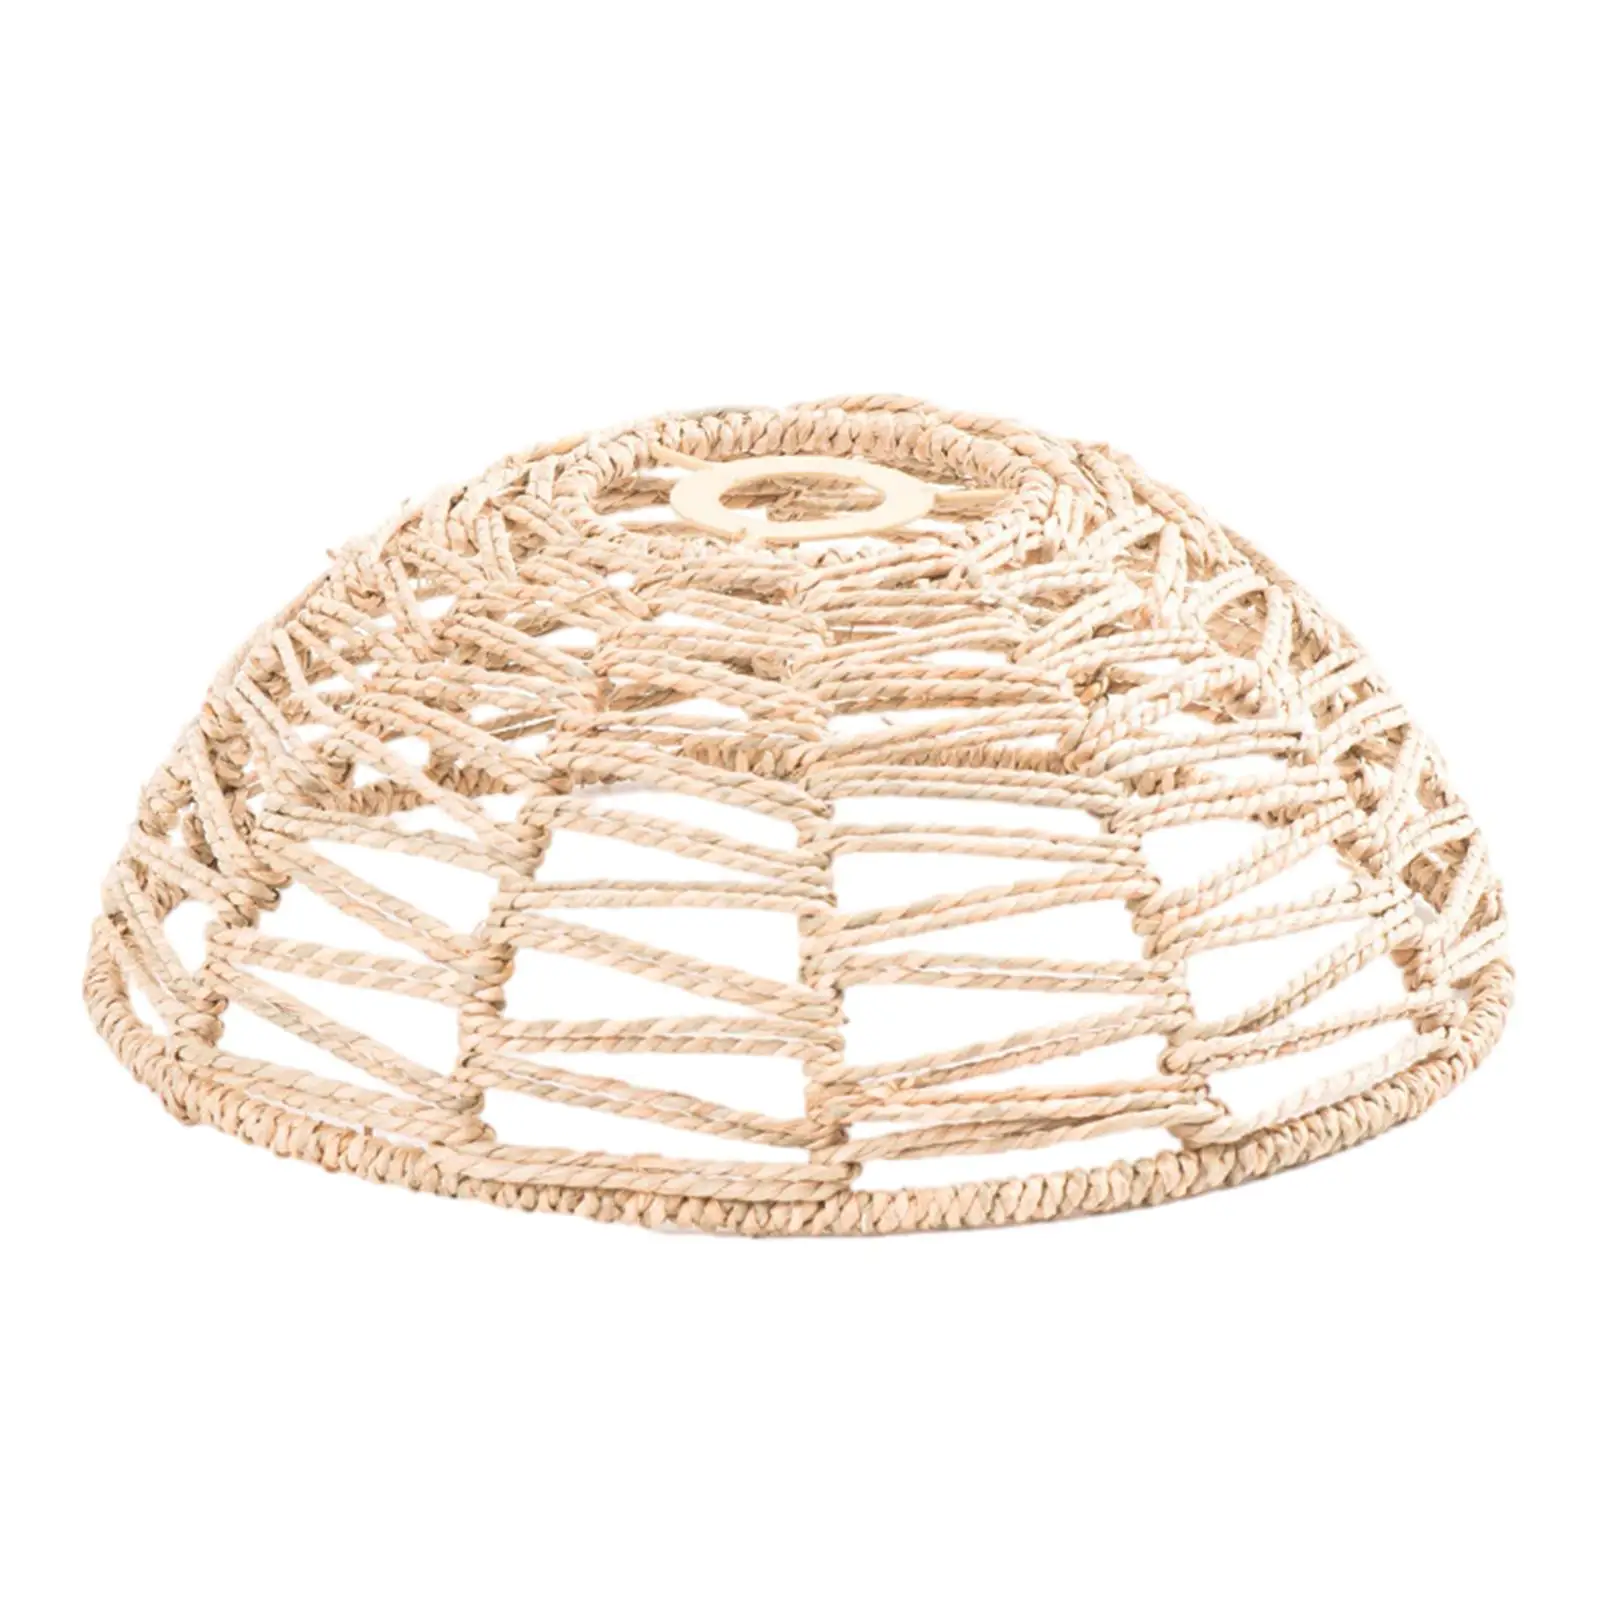 Rattan Lampshade Decor Chandelier Lamp Cover for Chandelier Floor Lamps Cafe